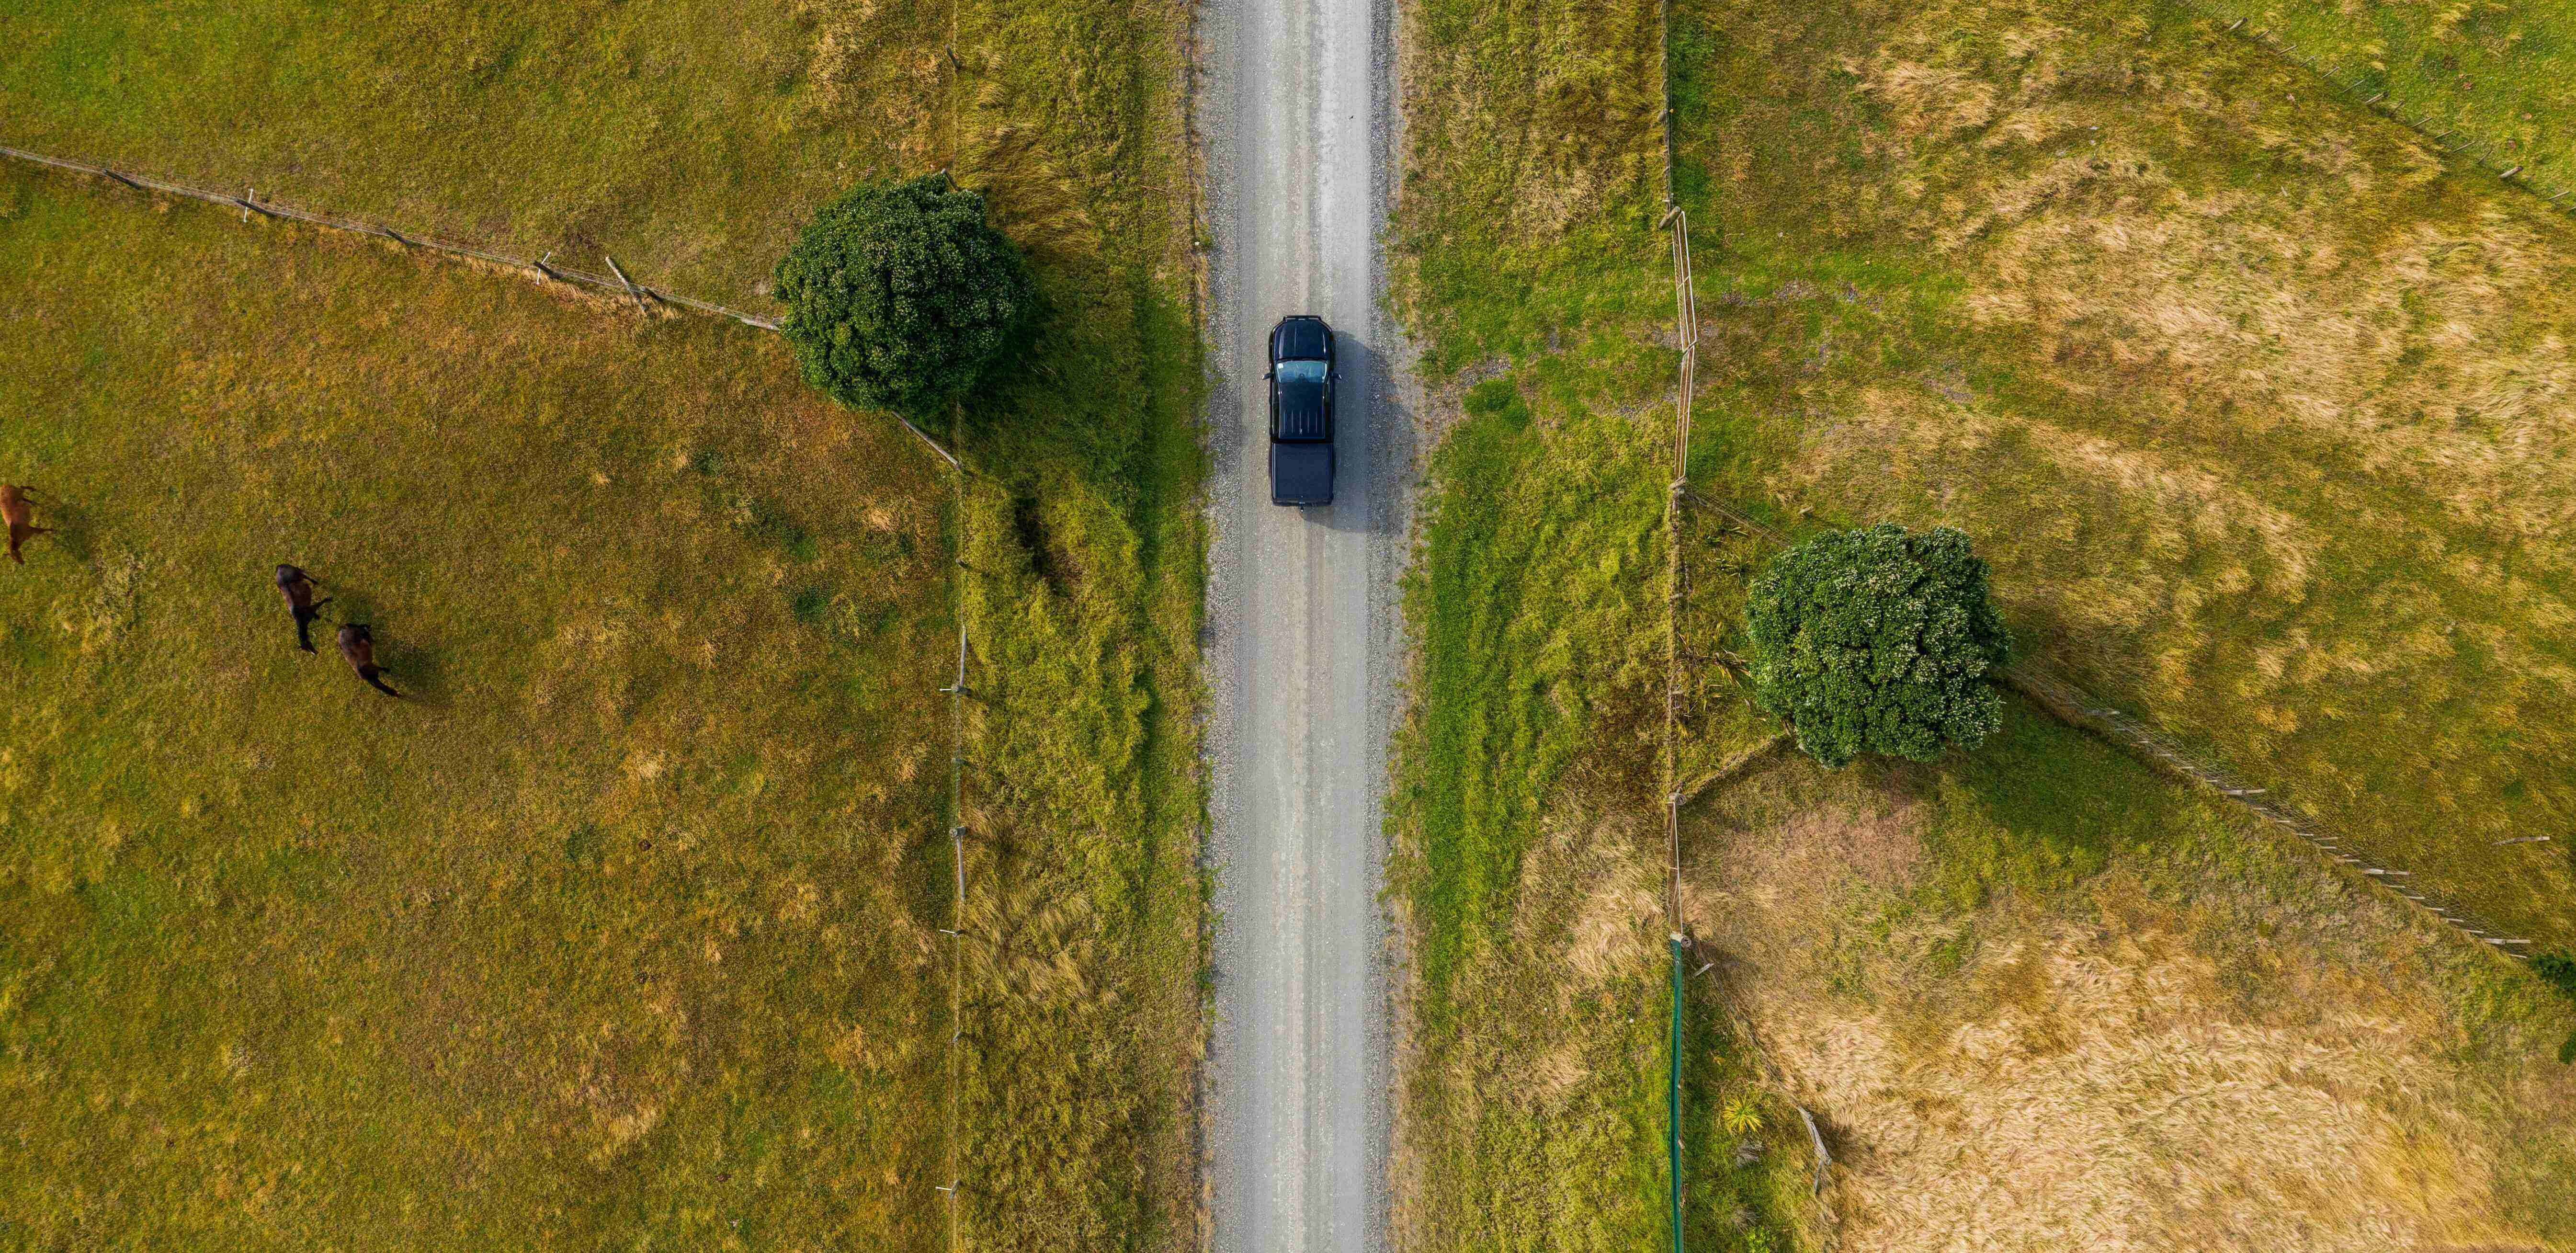 Aerial view of a car driving on a straight road surrounded by farmland